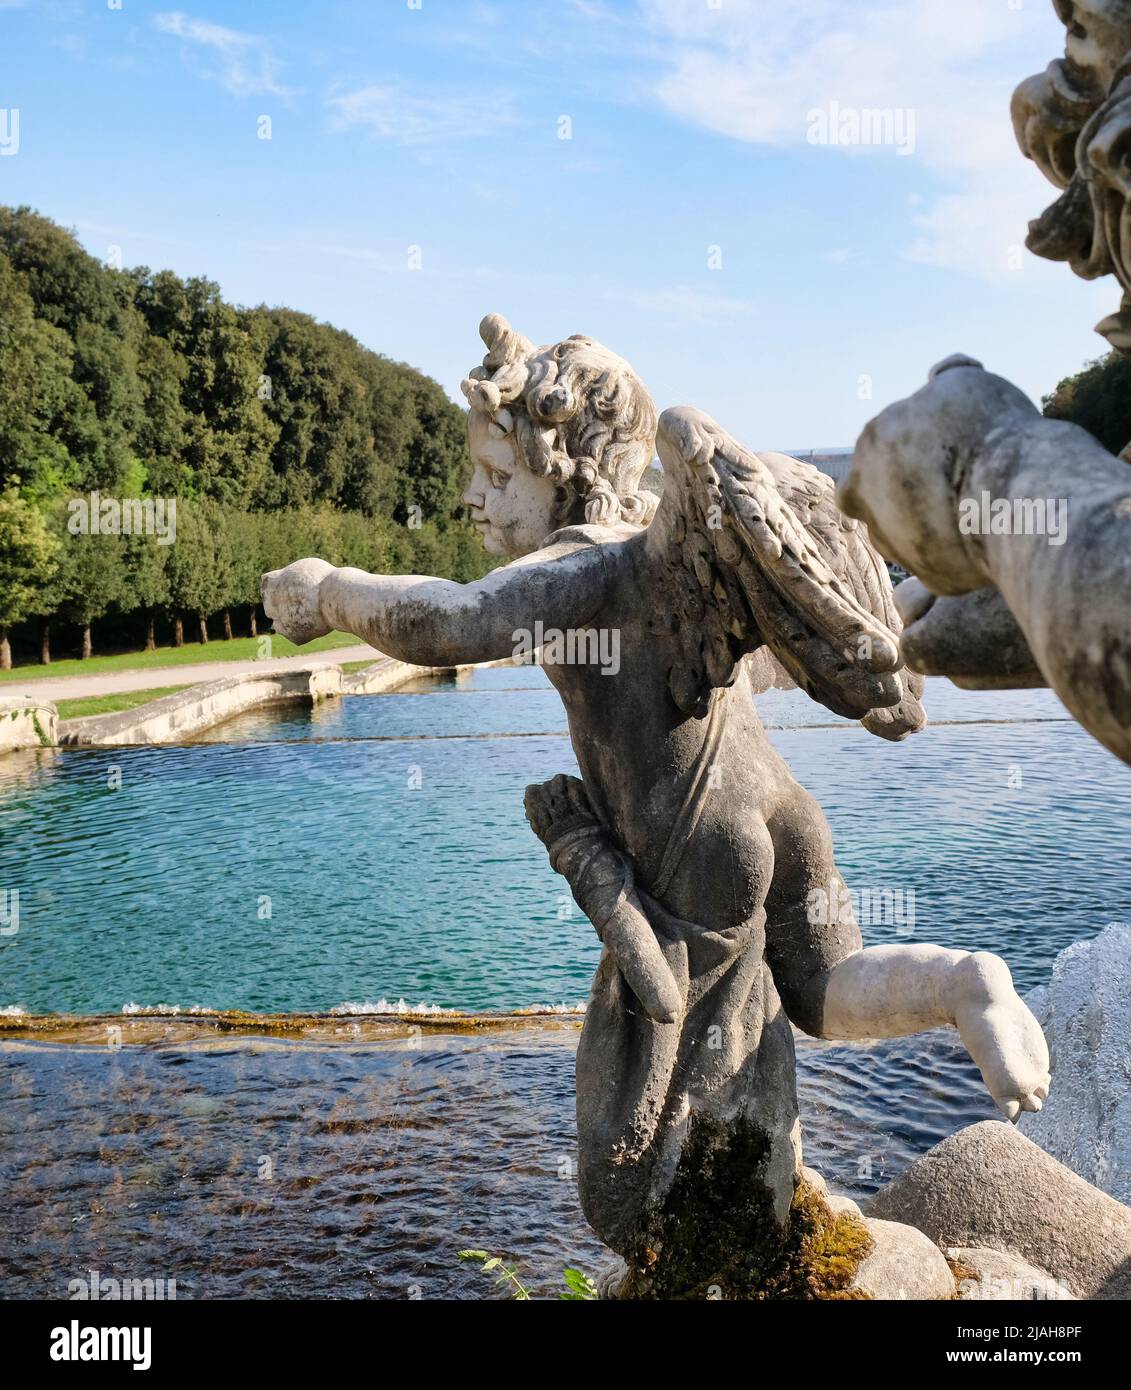 The Waterway with the Royal Palace of Caserta at the bottom as it appears from the Fountain of Venus and Adonis Stock Photo